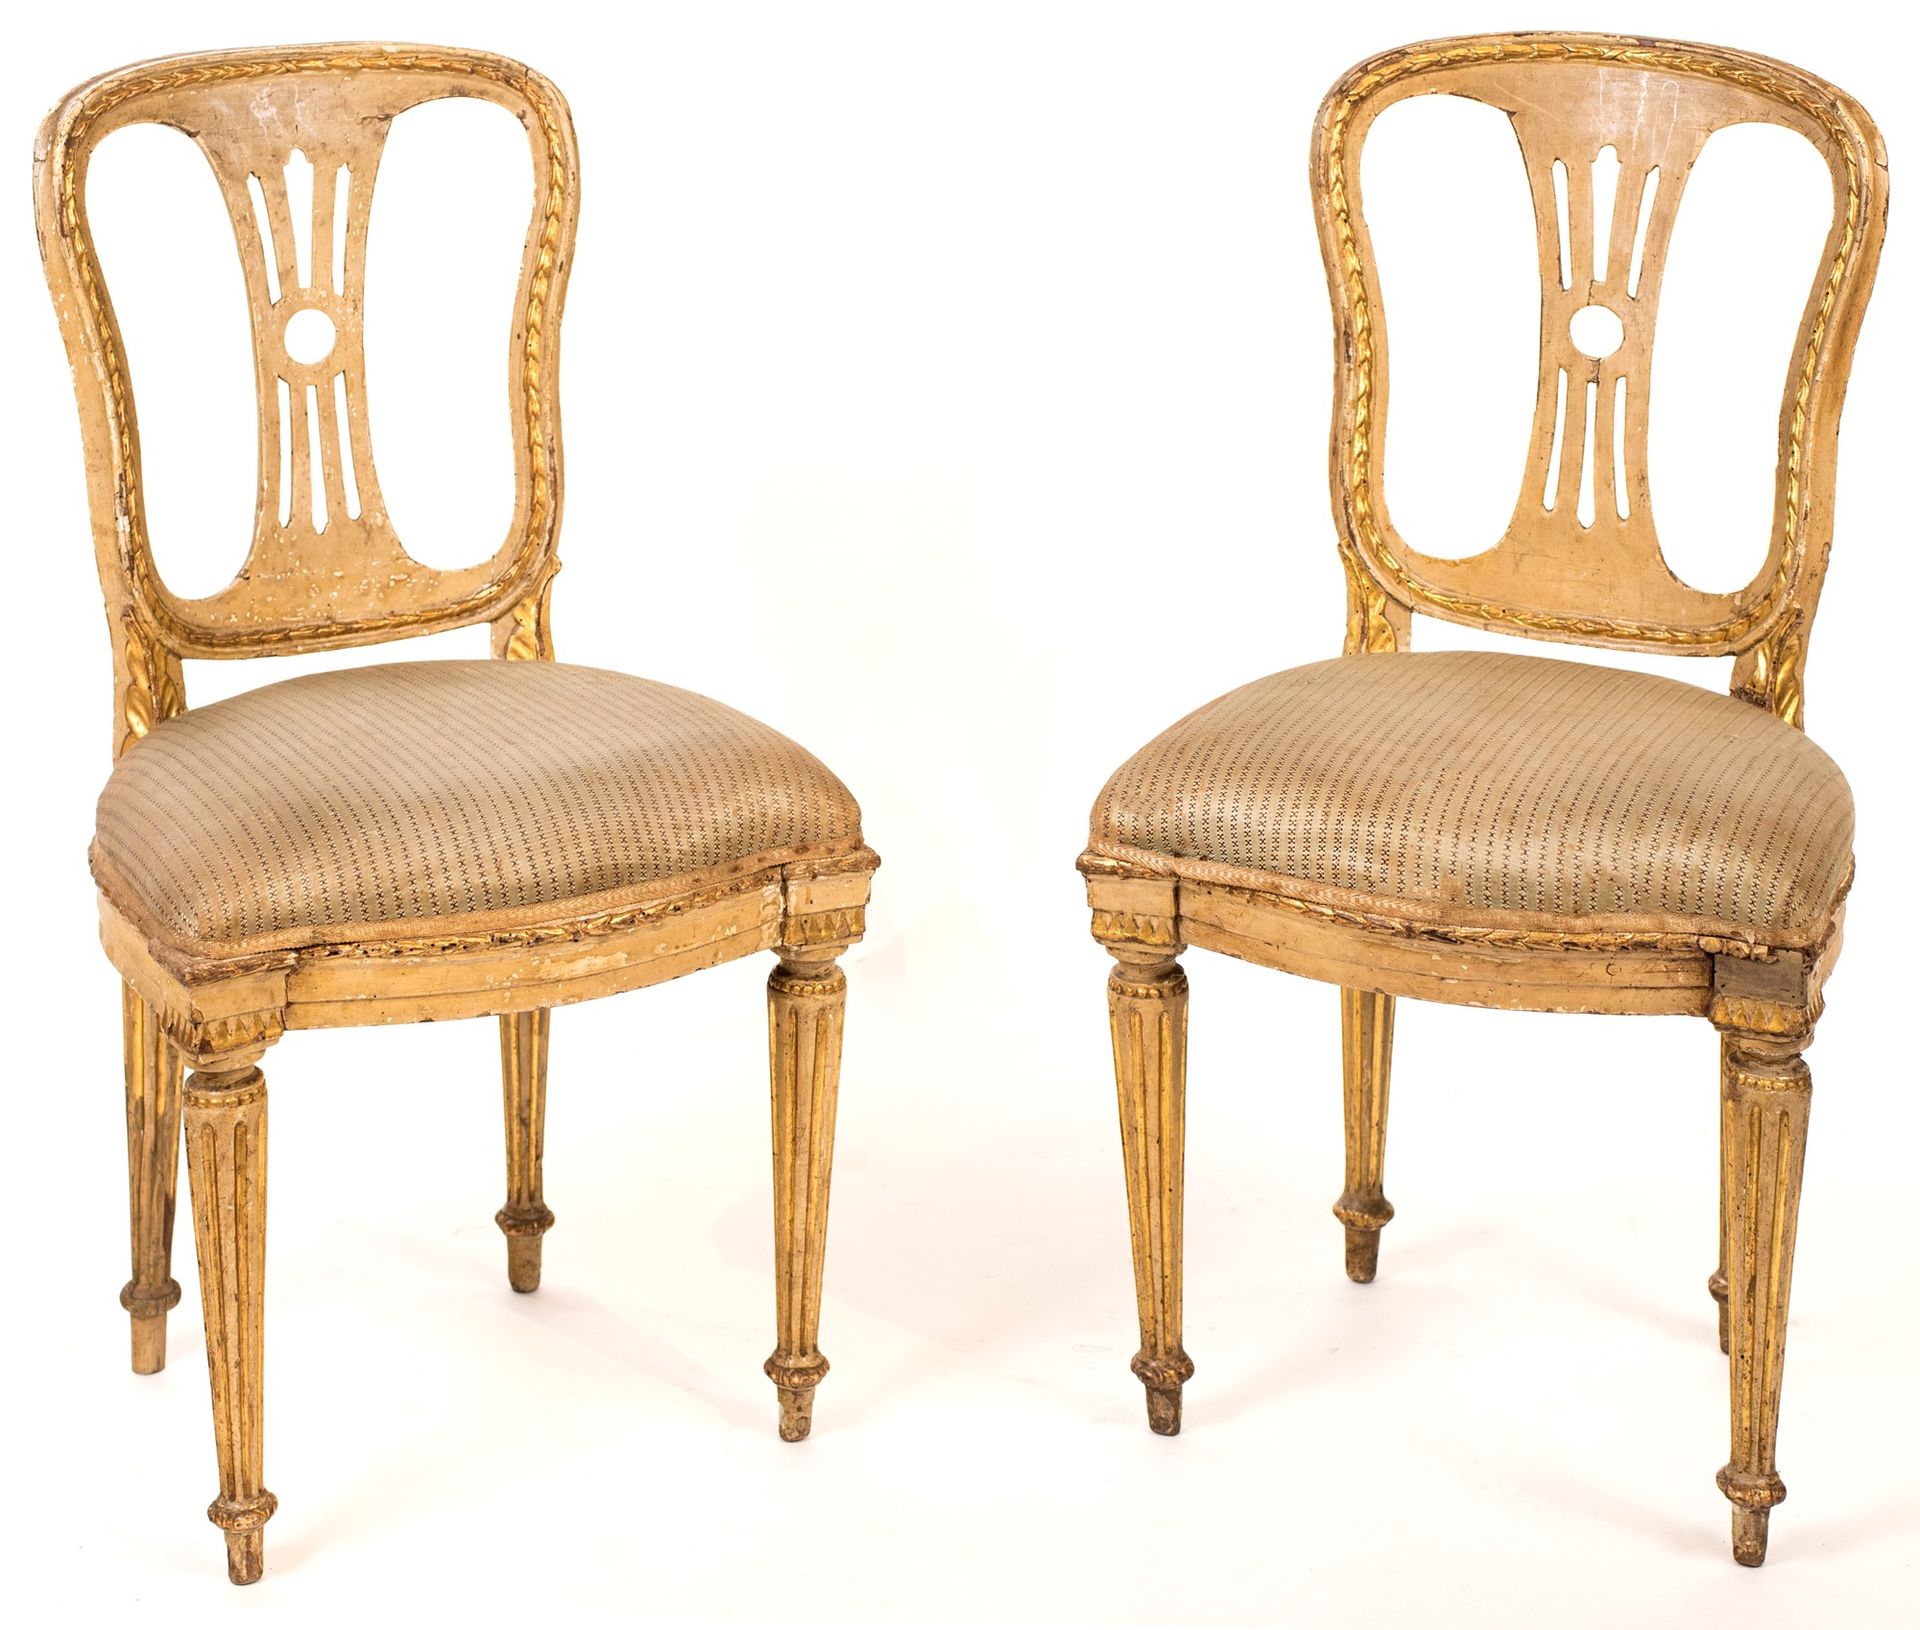 Pair of chairs in lacquered wood, late 18th century dorados a lo largo de los pe&hellip;